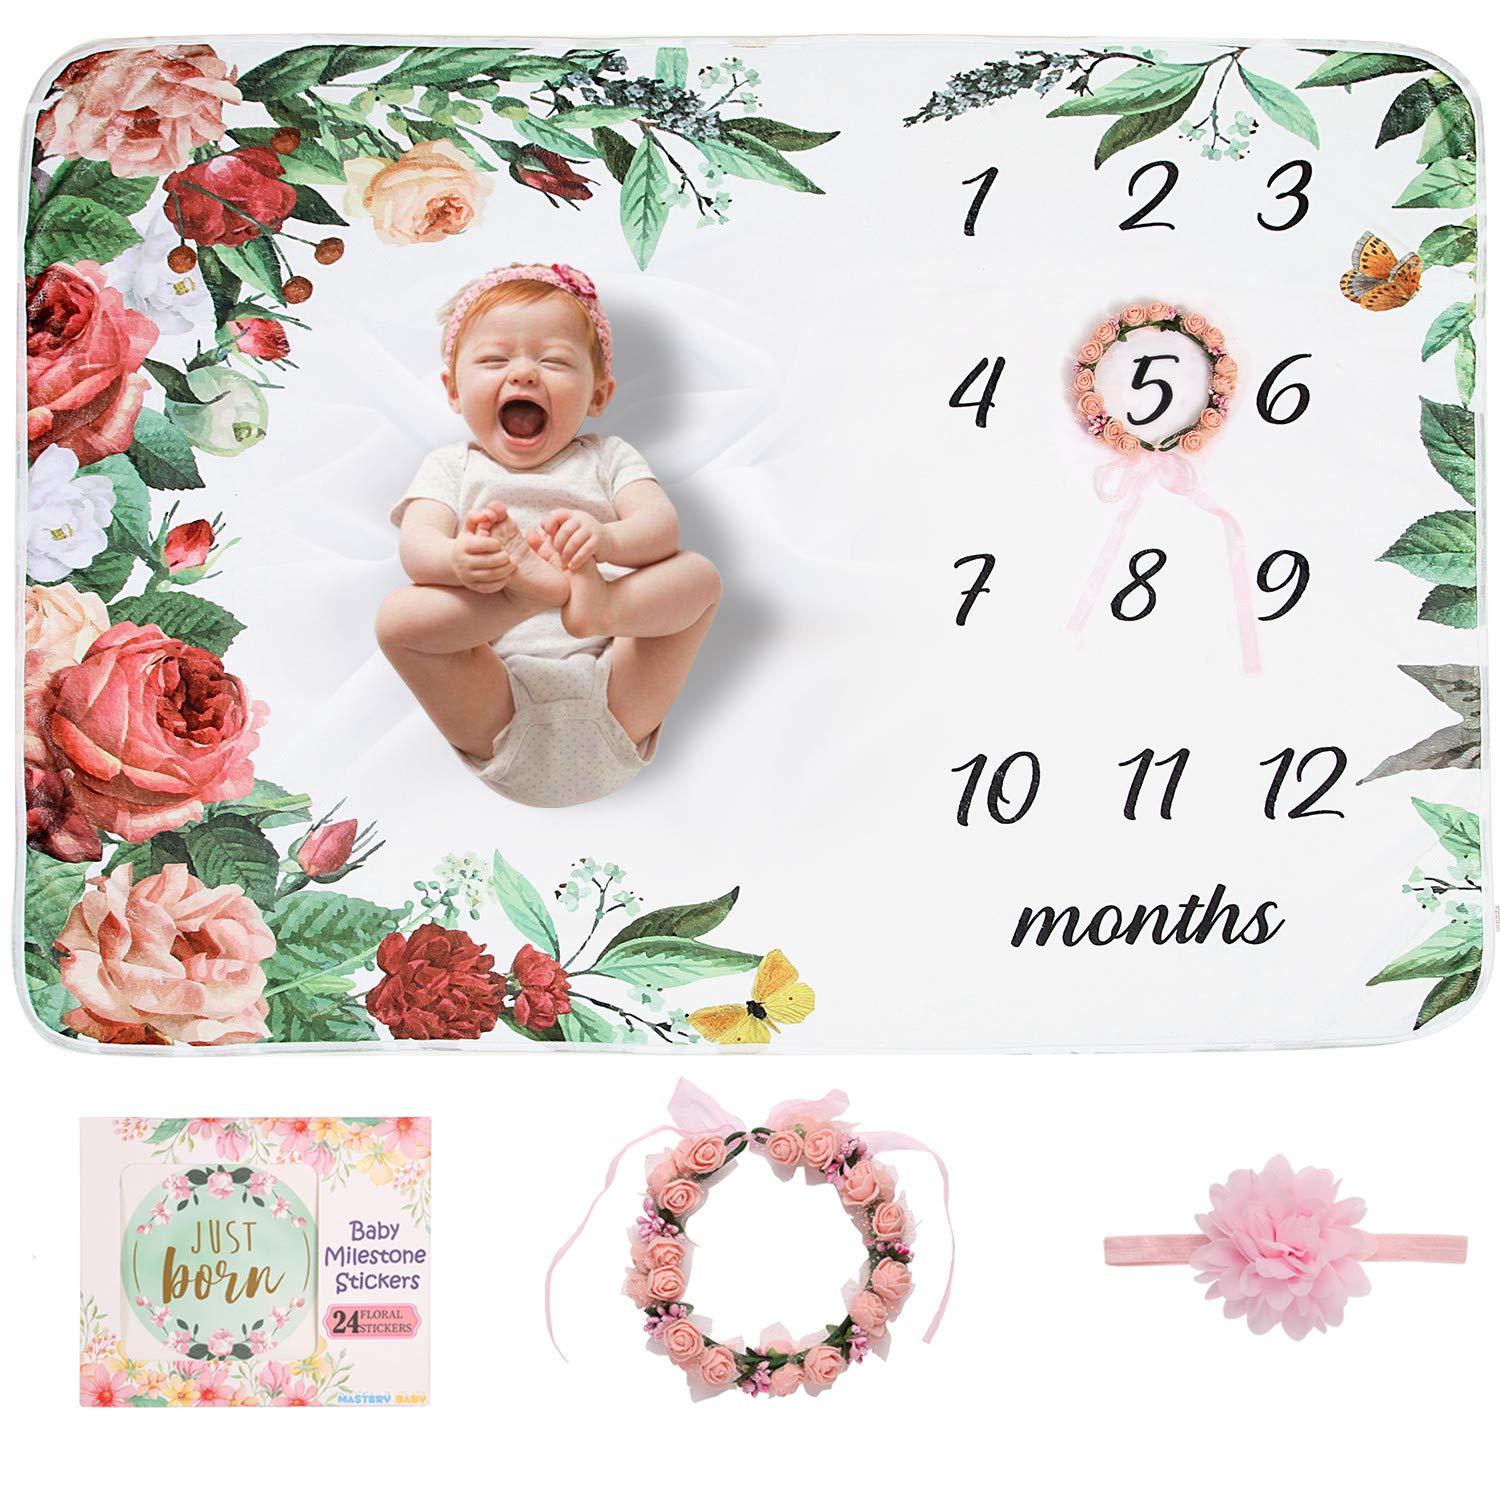 Book Cover Baby Monthly Milestone Blanket | Floral Monthly Milestone Stickers, Premium Floral Wreath & Headband | Extra Soft Fleece Baby Photo Blankets for Newborn 1-12 Months for Girl and Boy